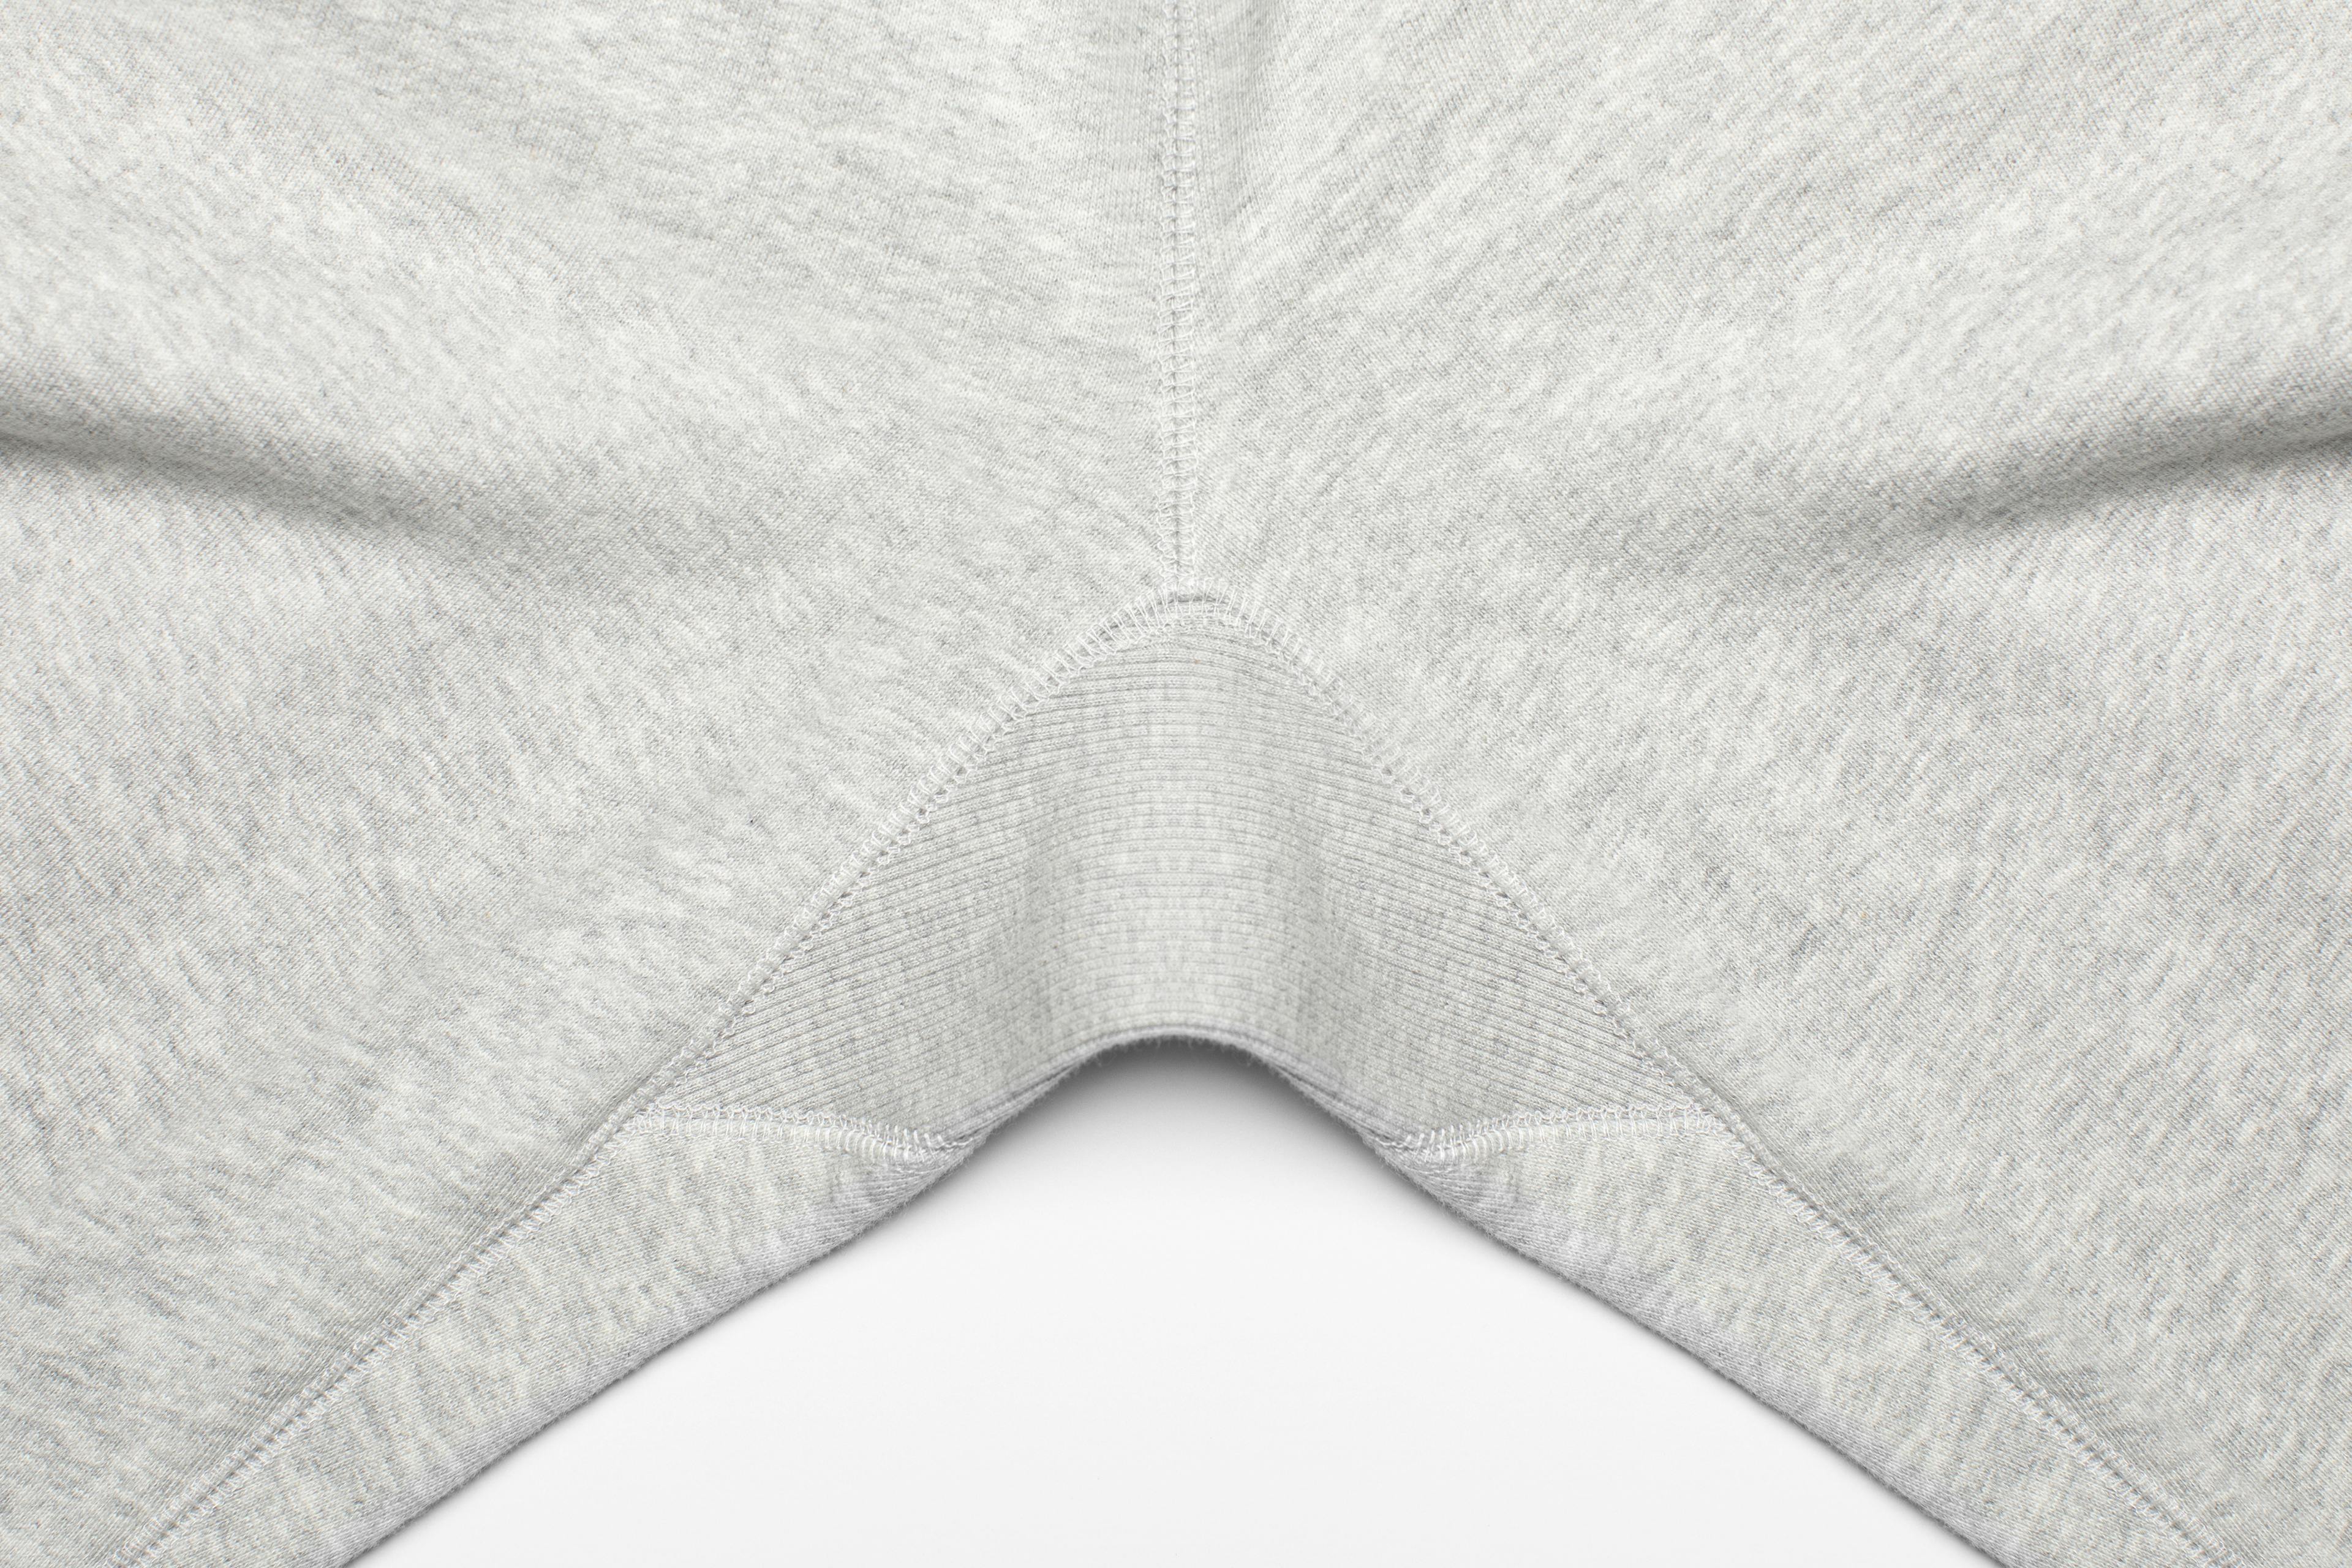 Close-Up View of Thuma Lounge Leisure Sweatpants in Grey Color